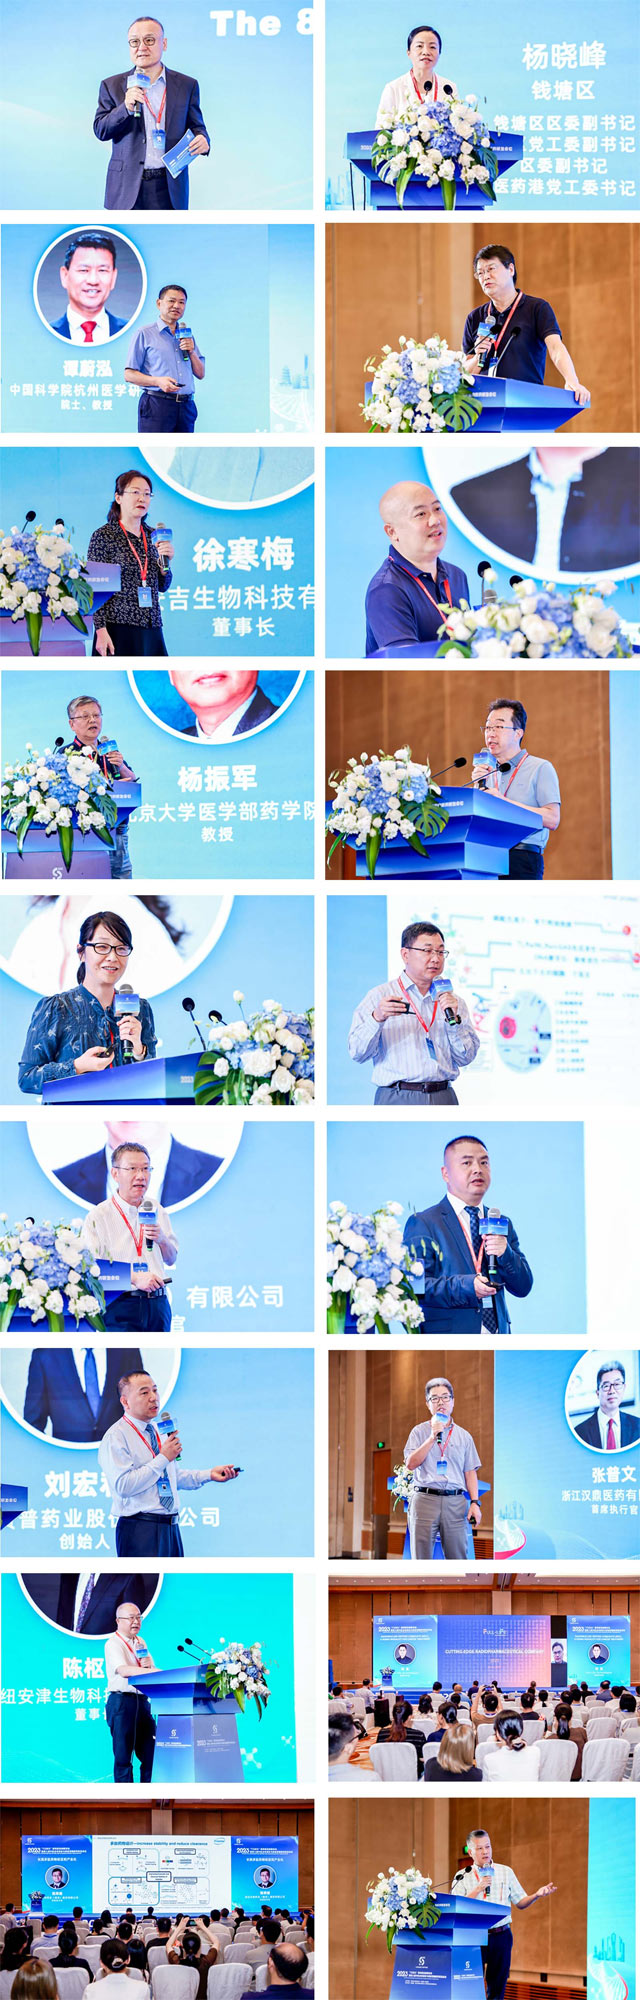 The-8th-CPC-Symposiun-on-Peptide-and-Oligonucleotide-Therapeutics-was-successfully-concluded-6.jpg